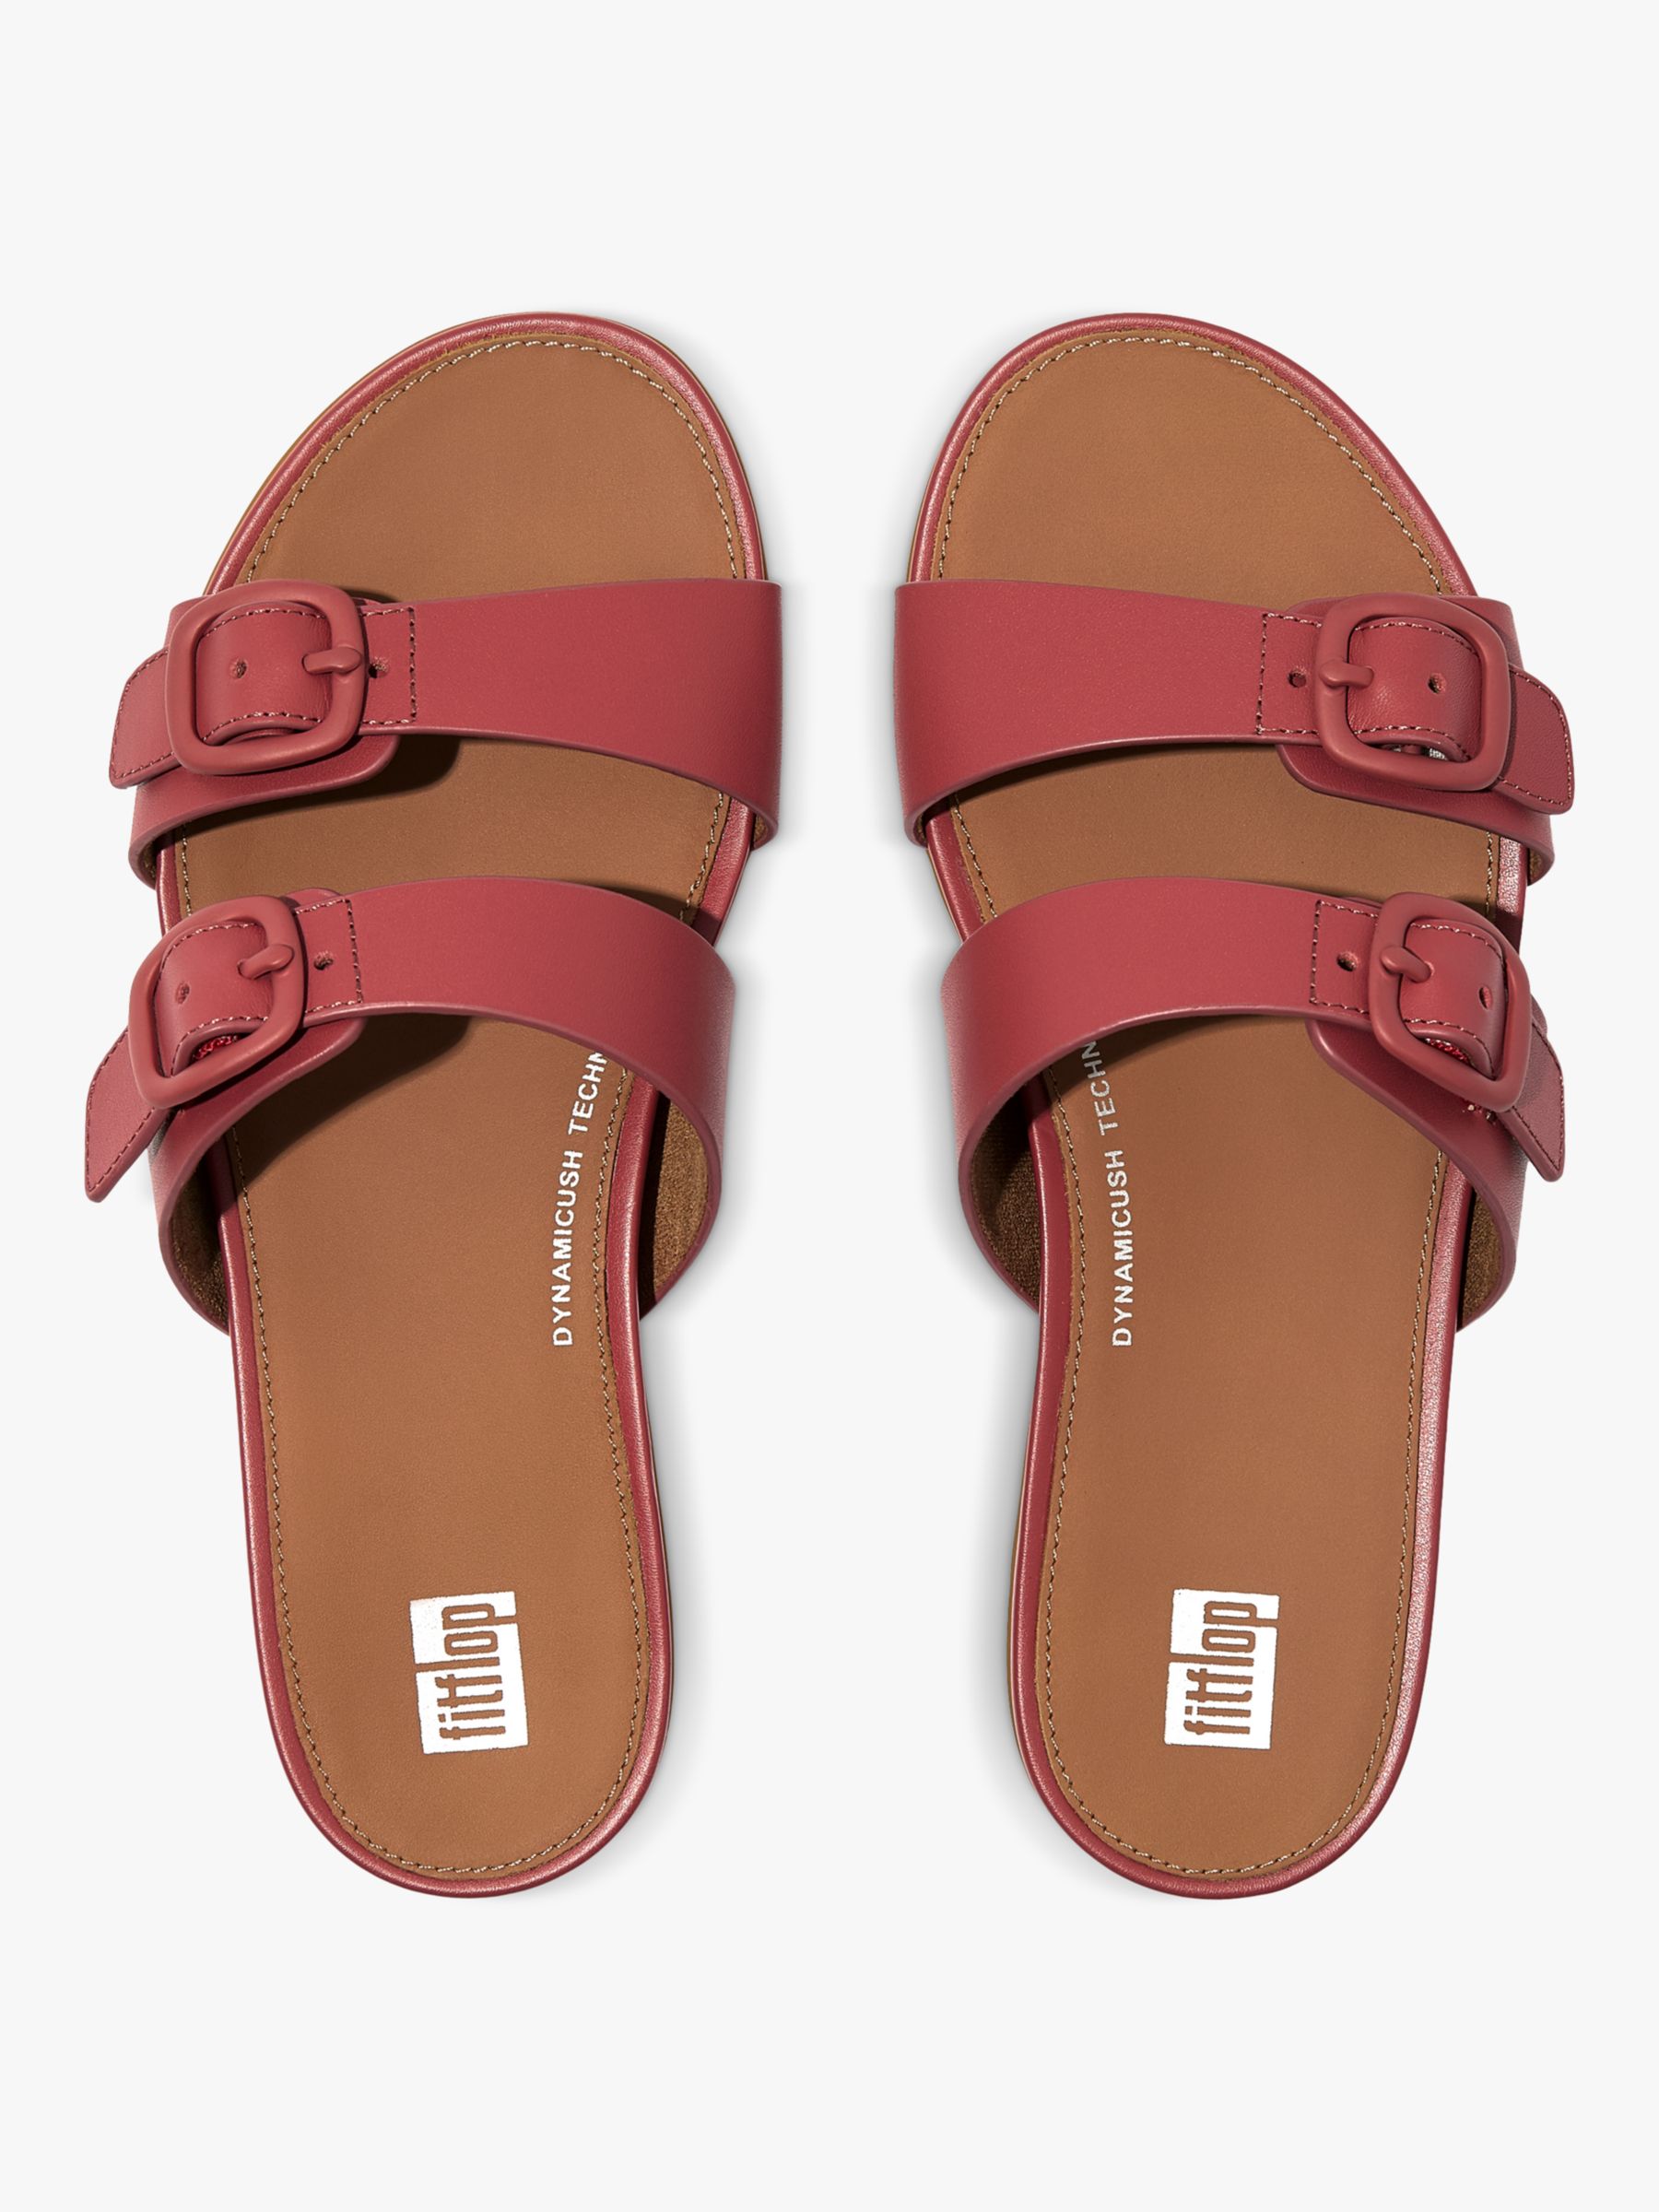 FitFlop Gracie Leather Sliders, Dusky Red, 3